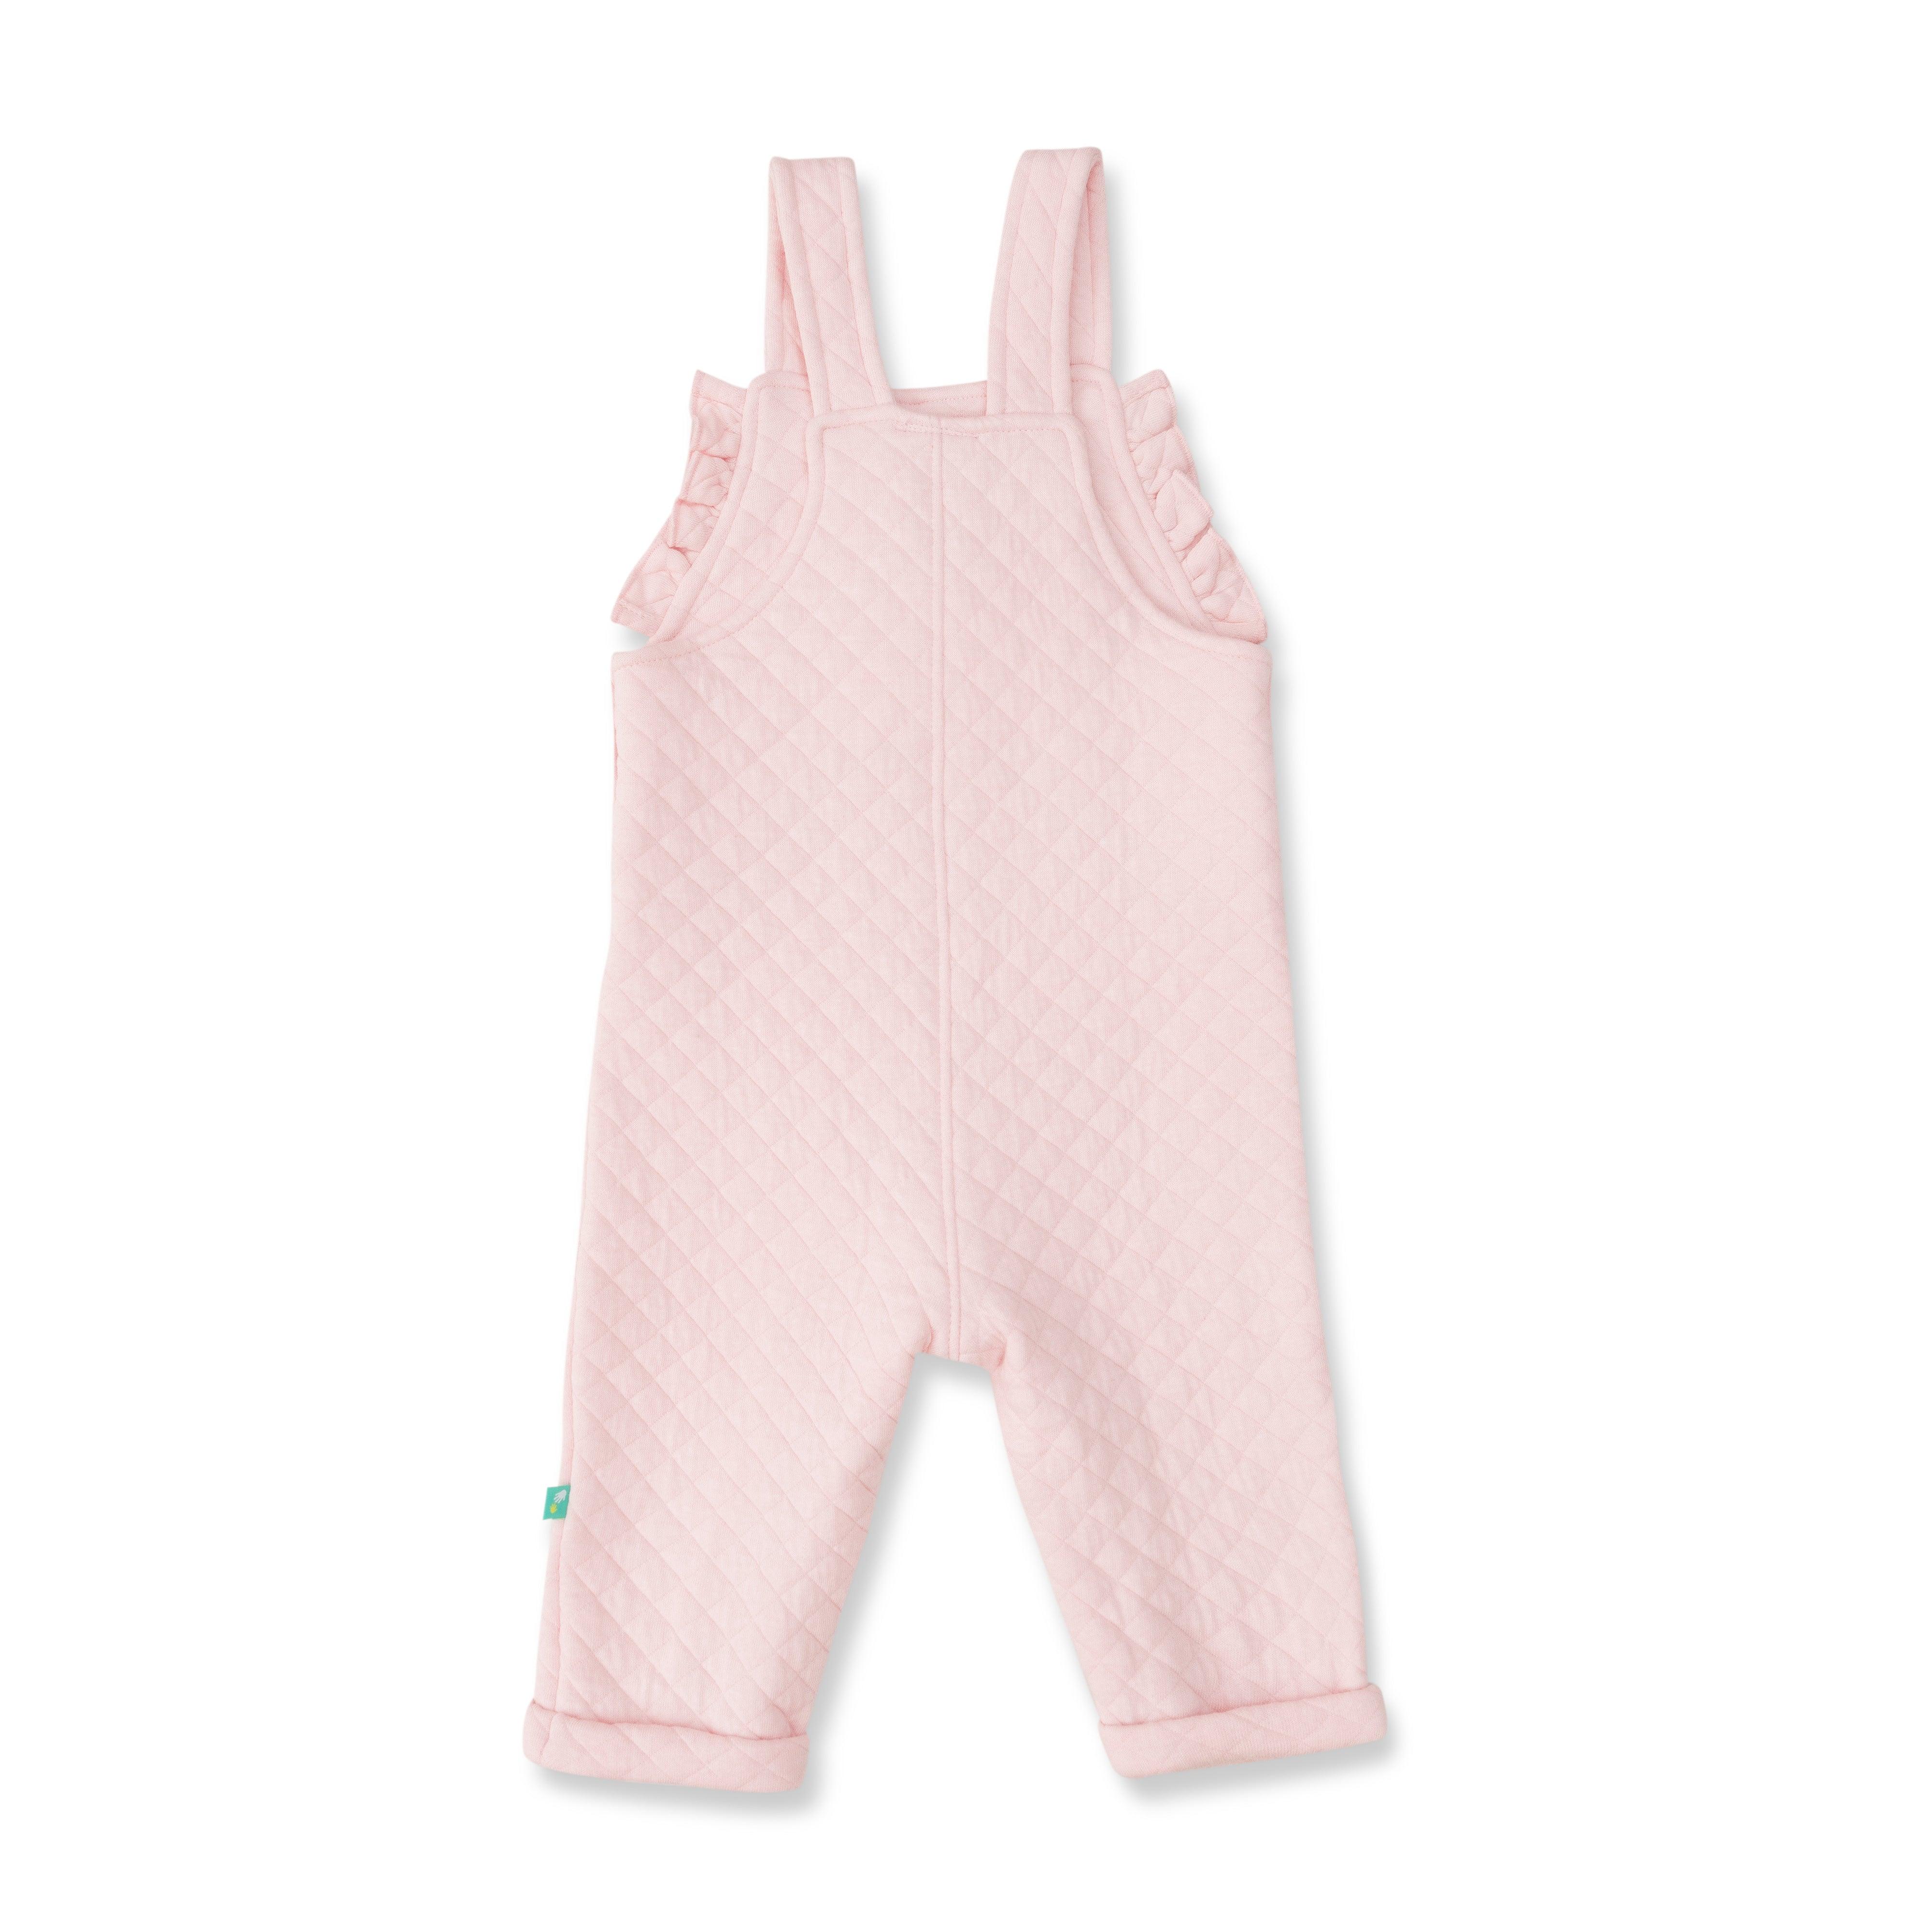 Baby Girls Solid Dungaree & Polka dots Top - Juscubs